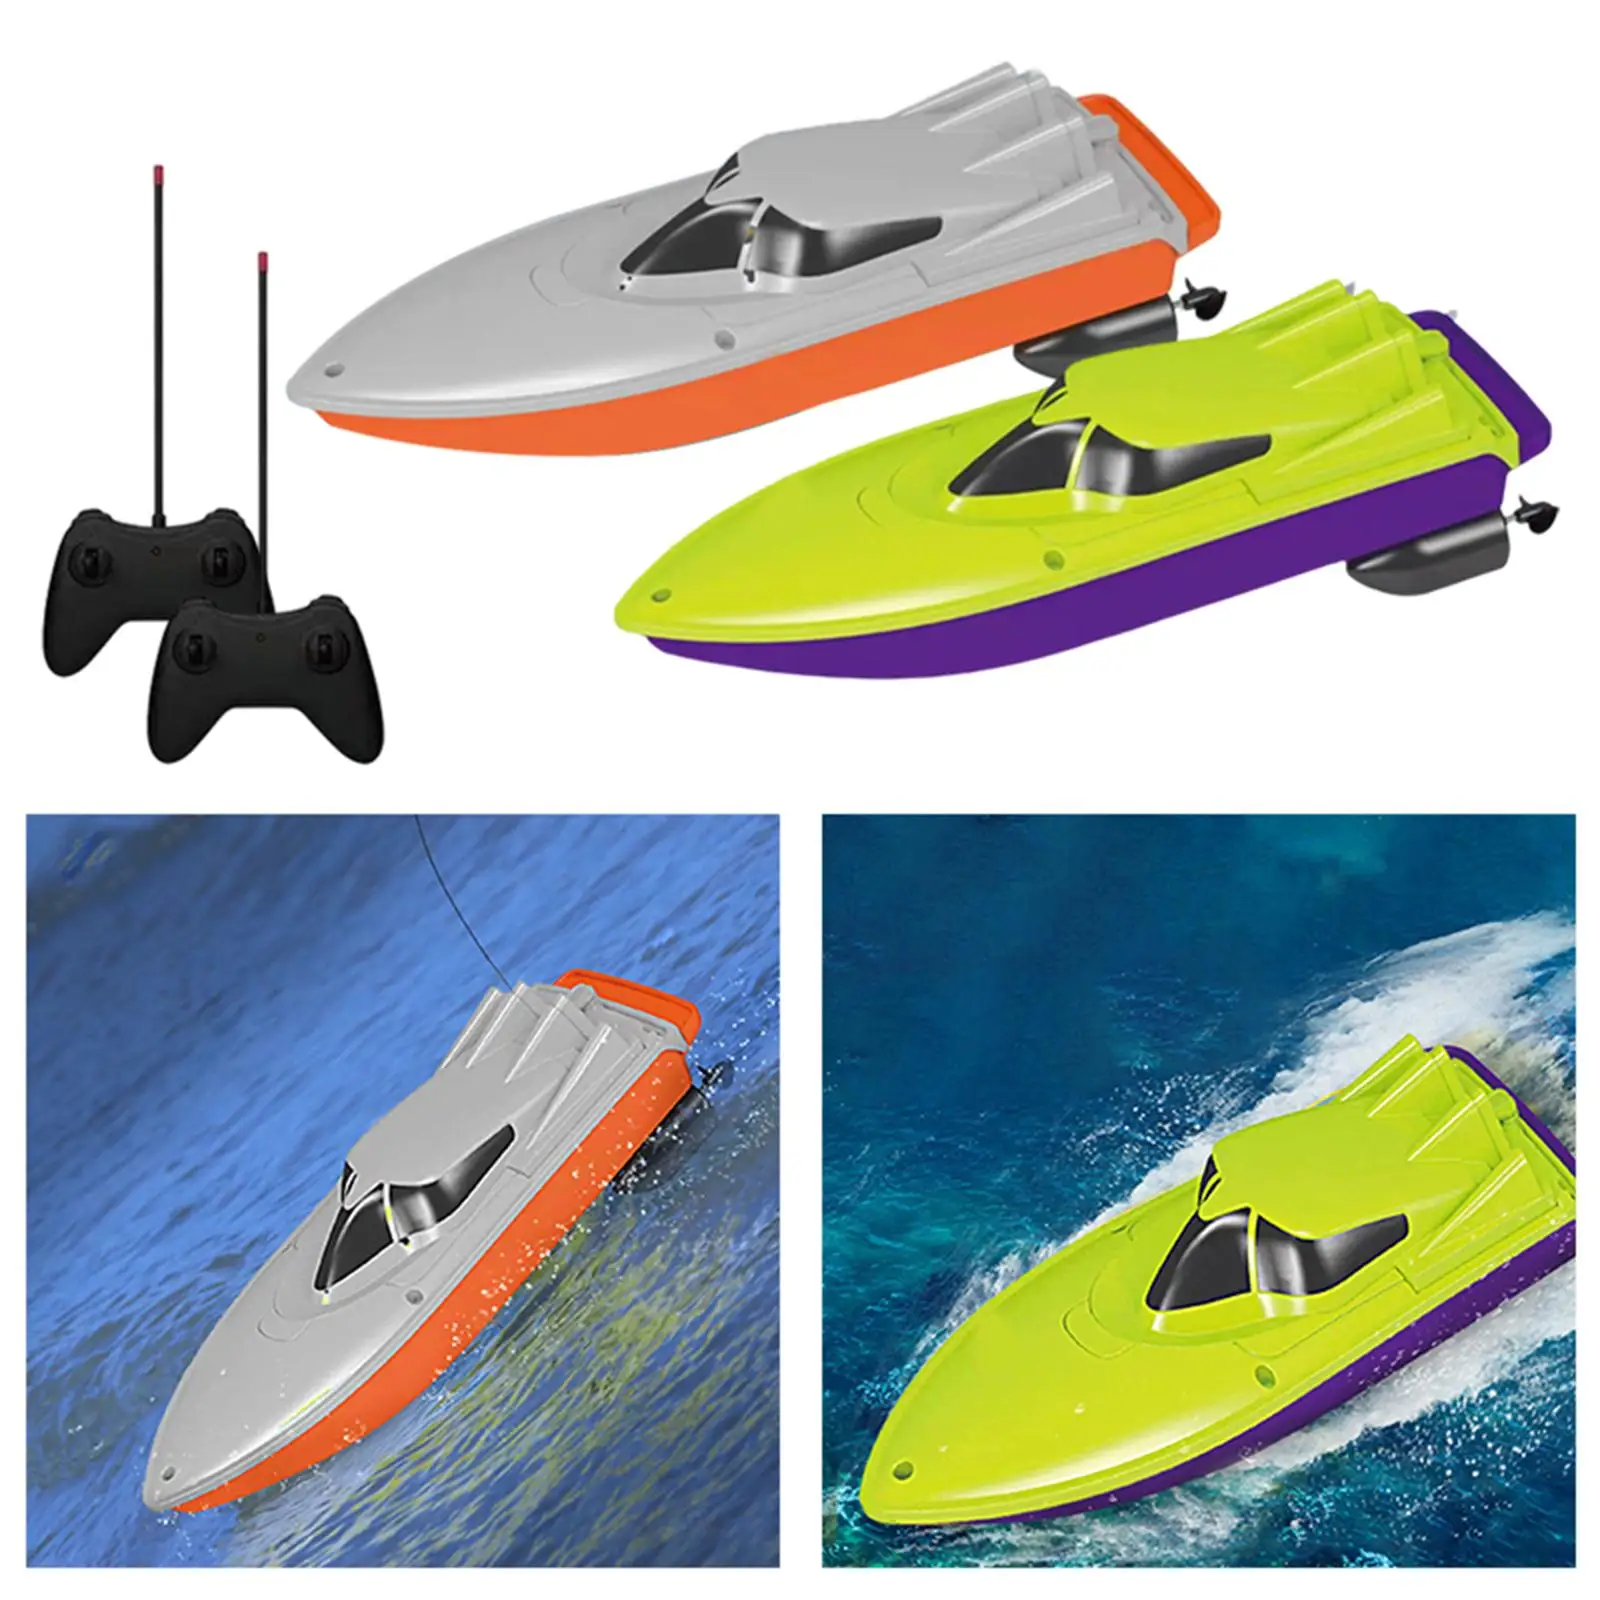 2.4G RC Boat 10km/H Electric Ship Yacht Toys High Speed Remote Control Boat for River, Kids and Adults, Outdoor Sports Toy,